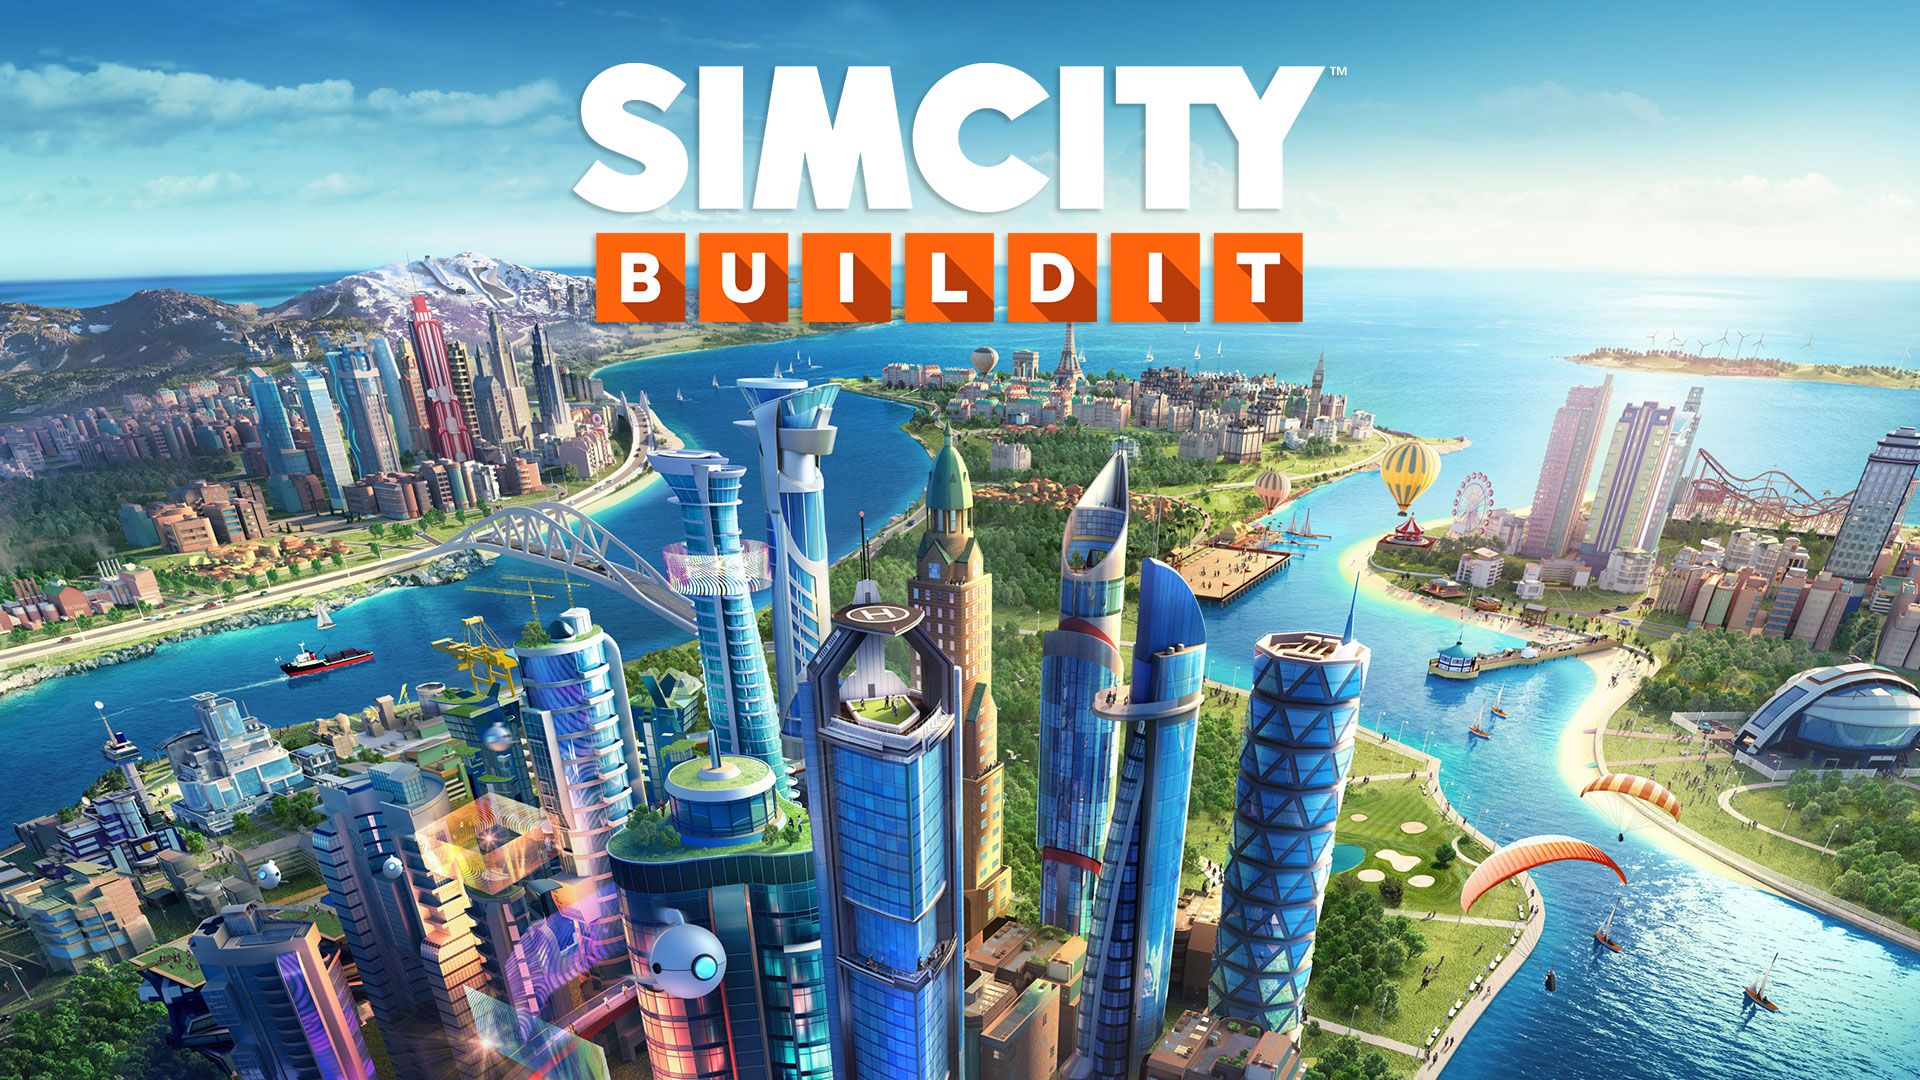 HQ Simcity Wallpapers | File 660.84Kb